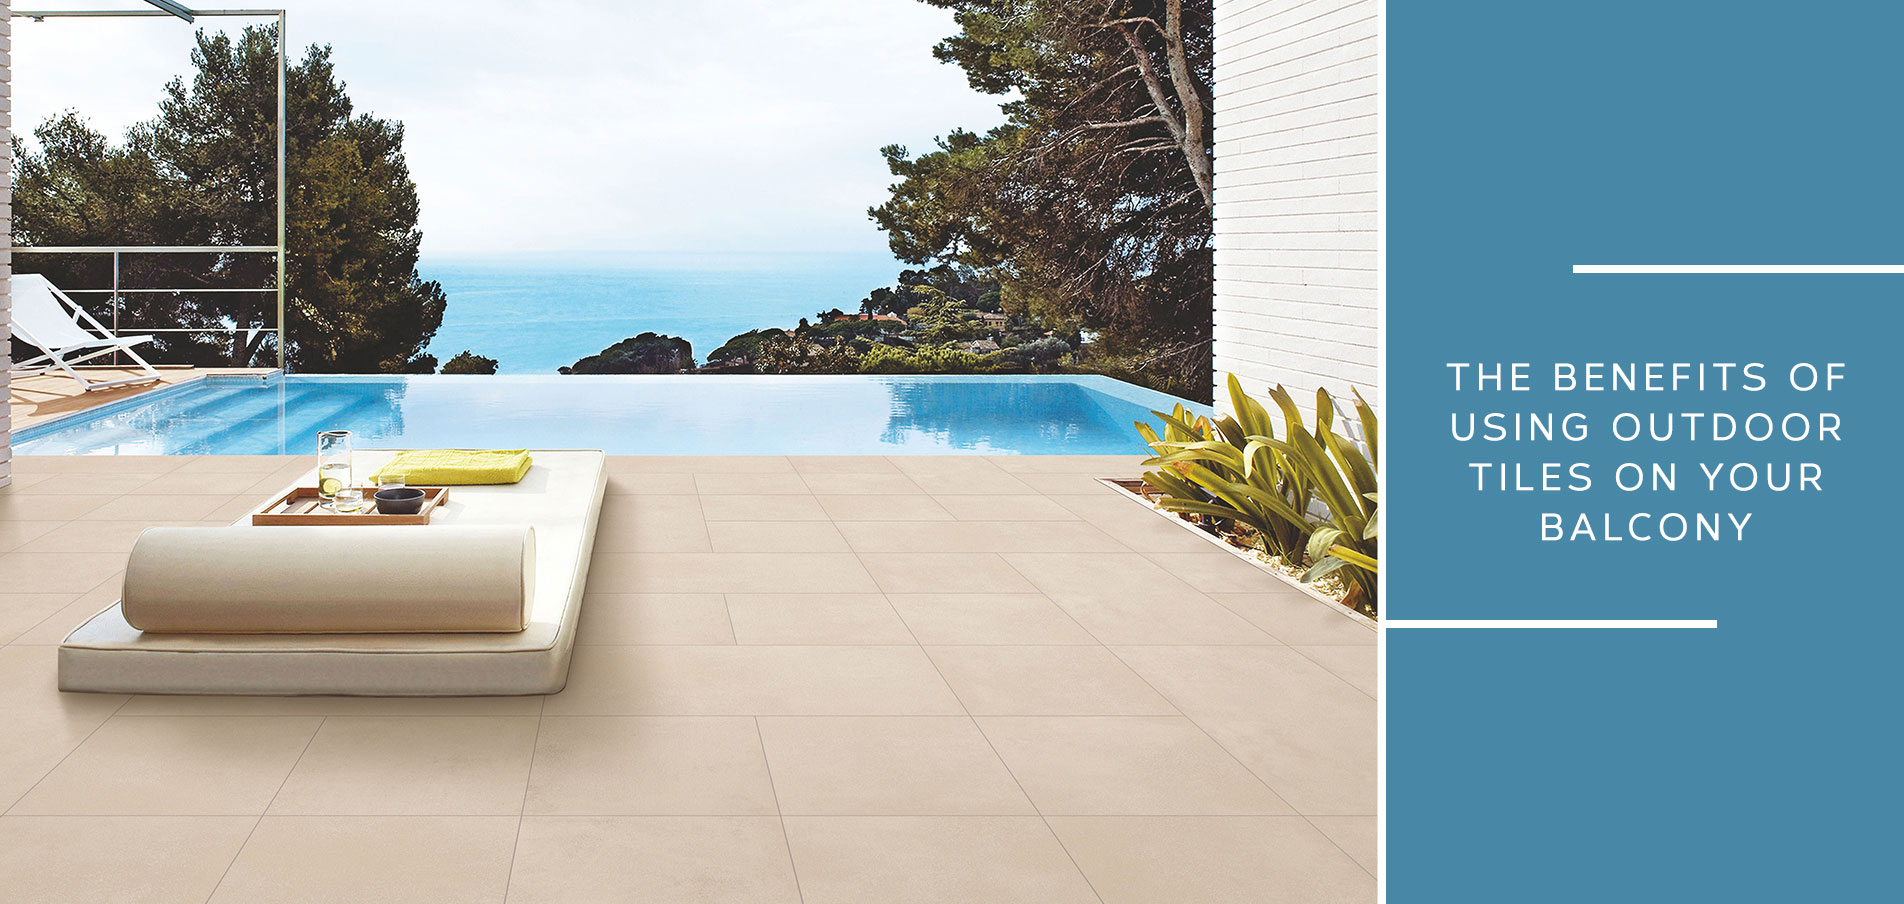 Experience the Benefits of Outdoor Tiles on Your Balcony